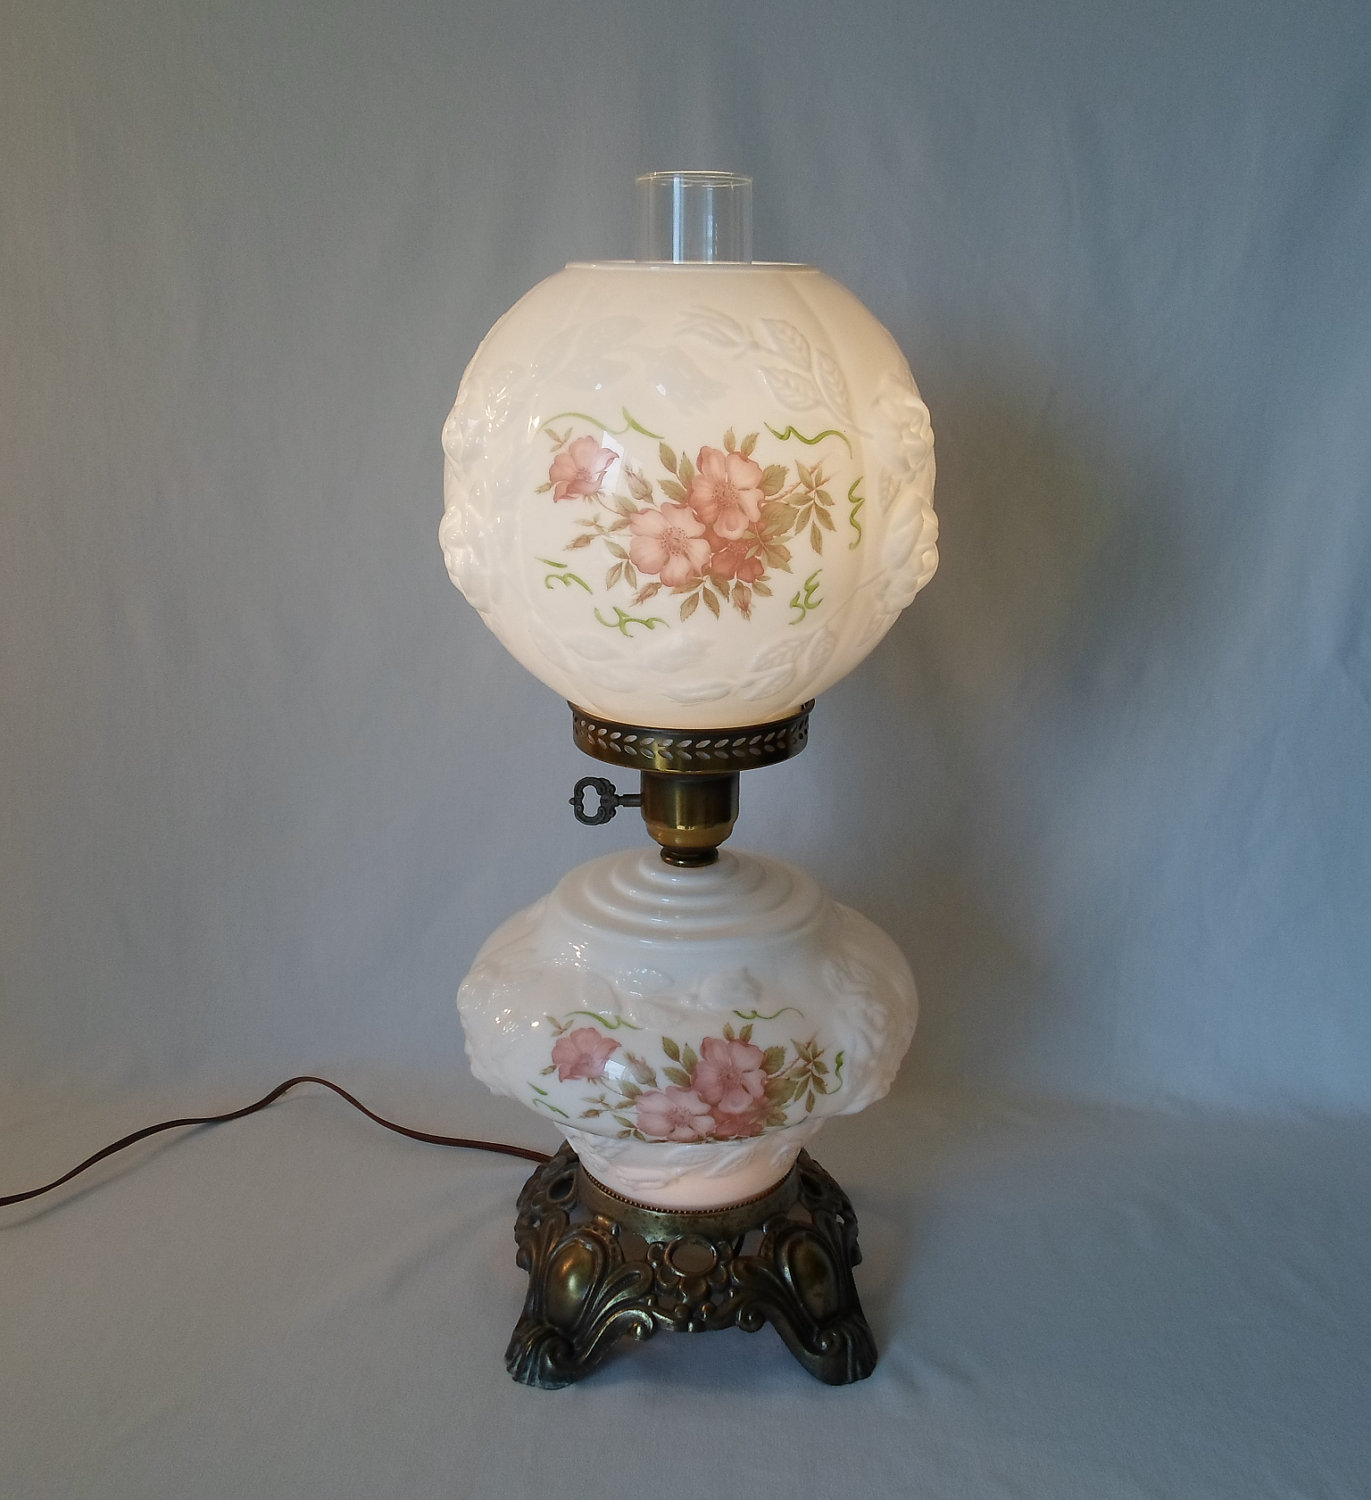 Antique Lamp Globes 10 Ways To, Antique Table Lamp Globes